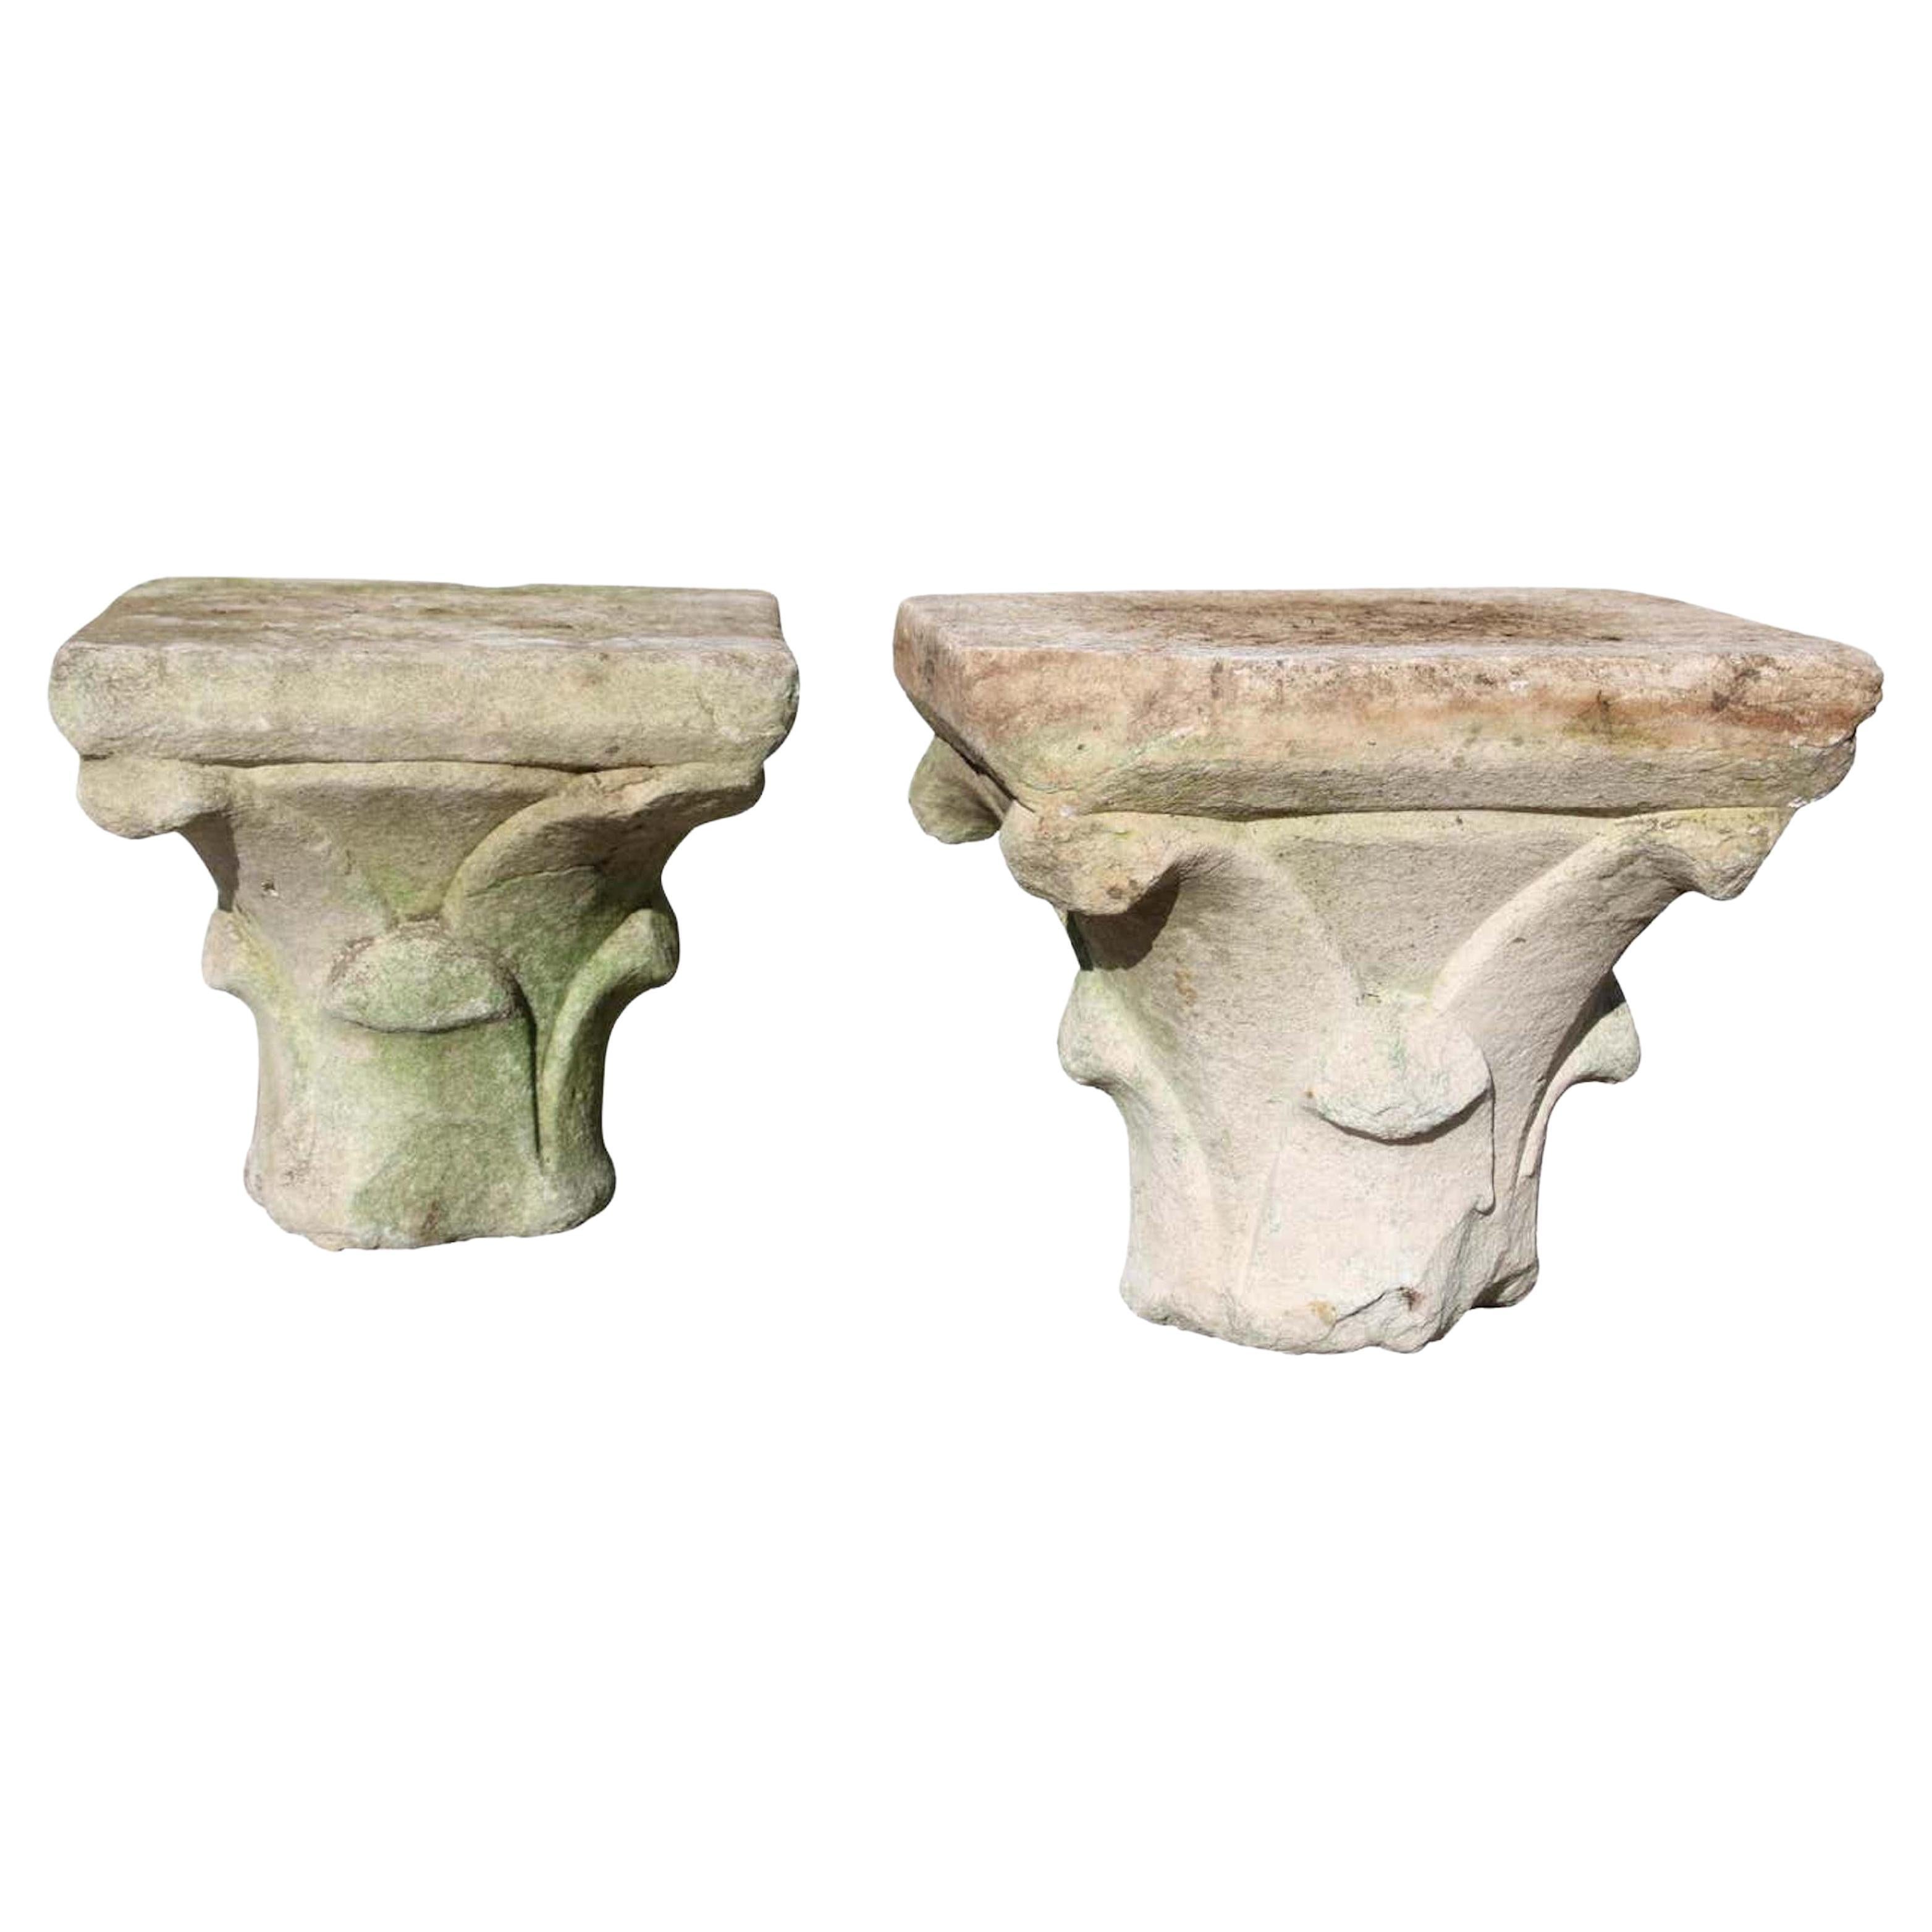 Limestone Capitals, Medieval, Carved